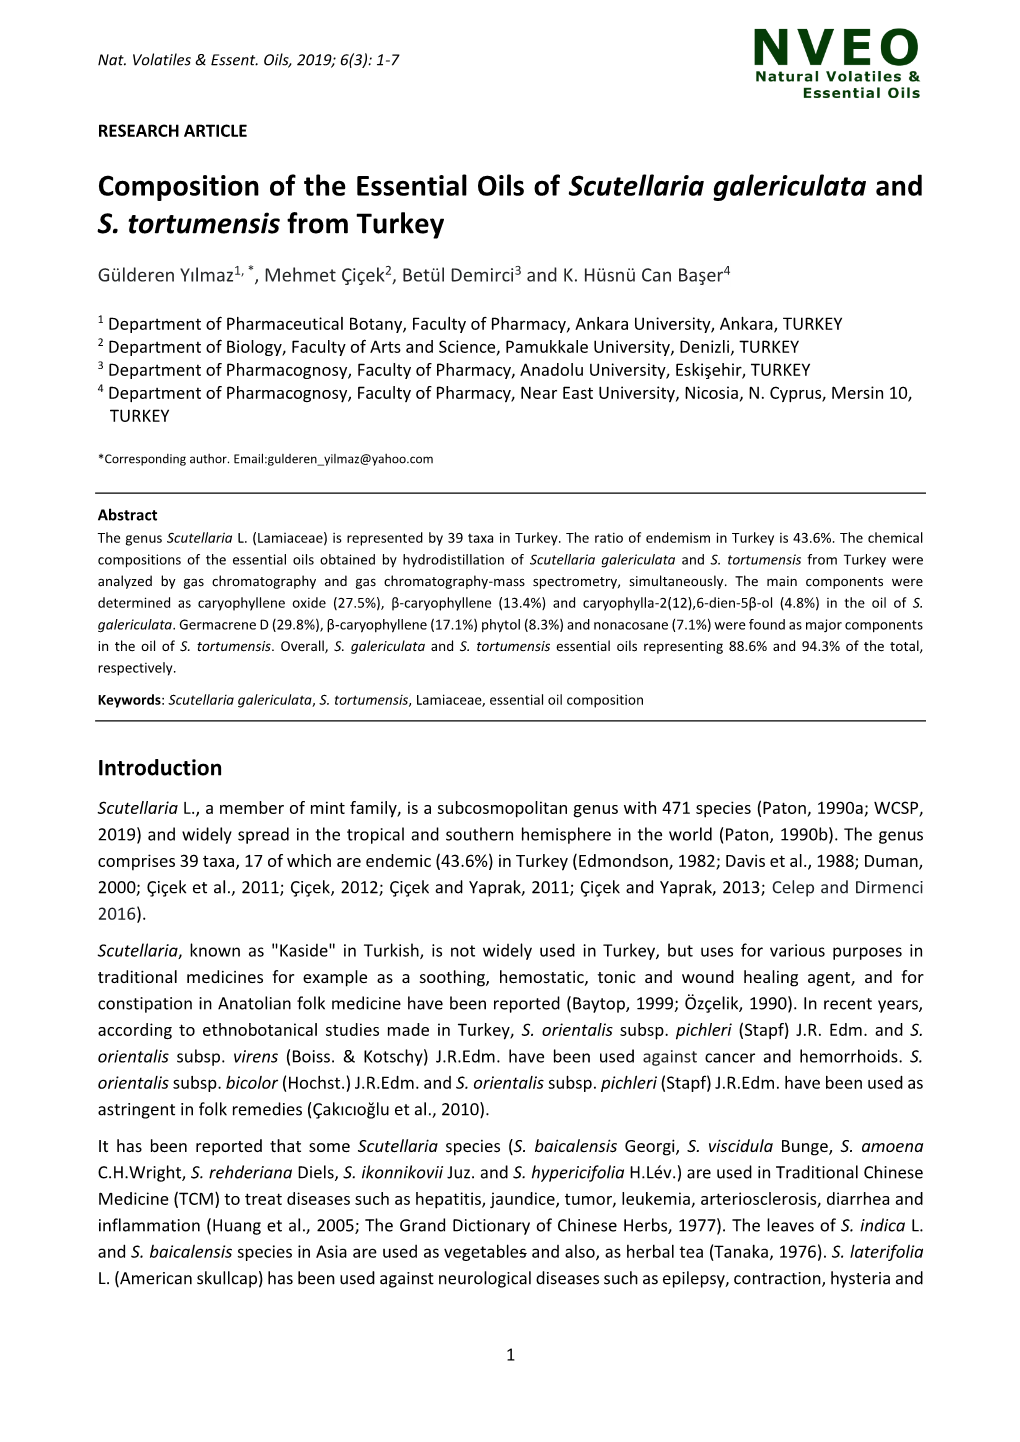 Composition of the Essential Oils of Scutellaria Galericulata and S. Tortumensis from Turkey